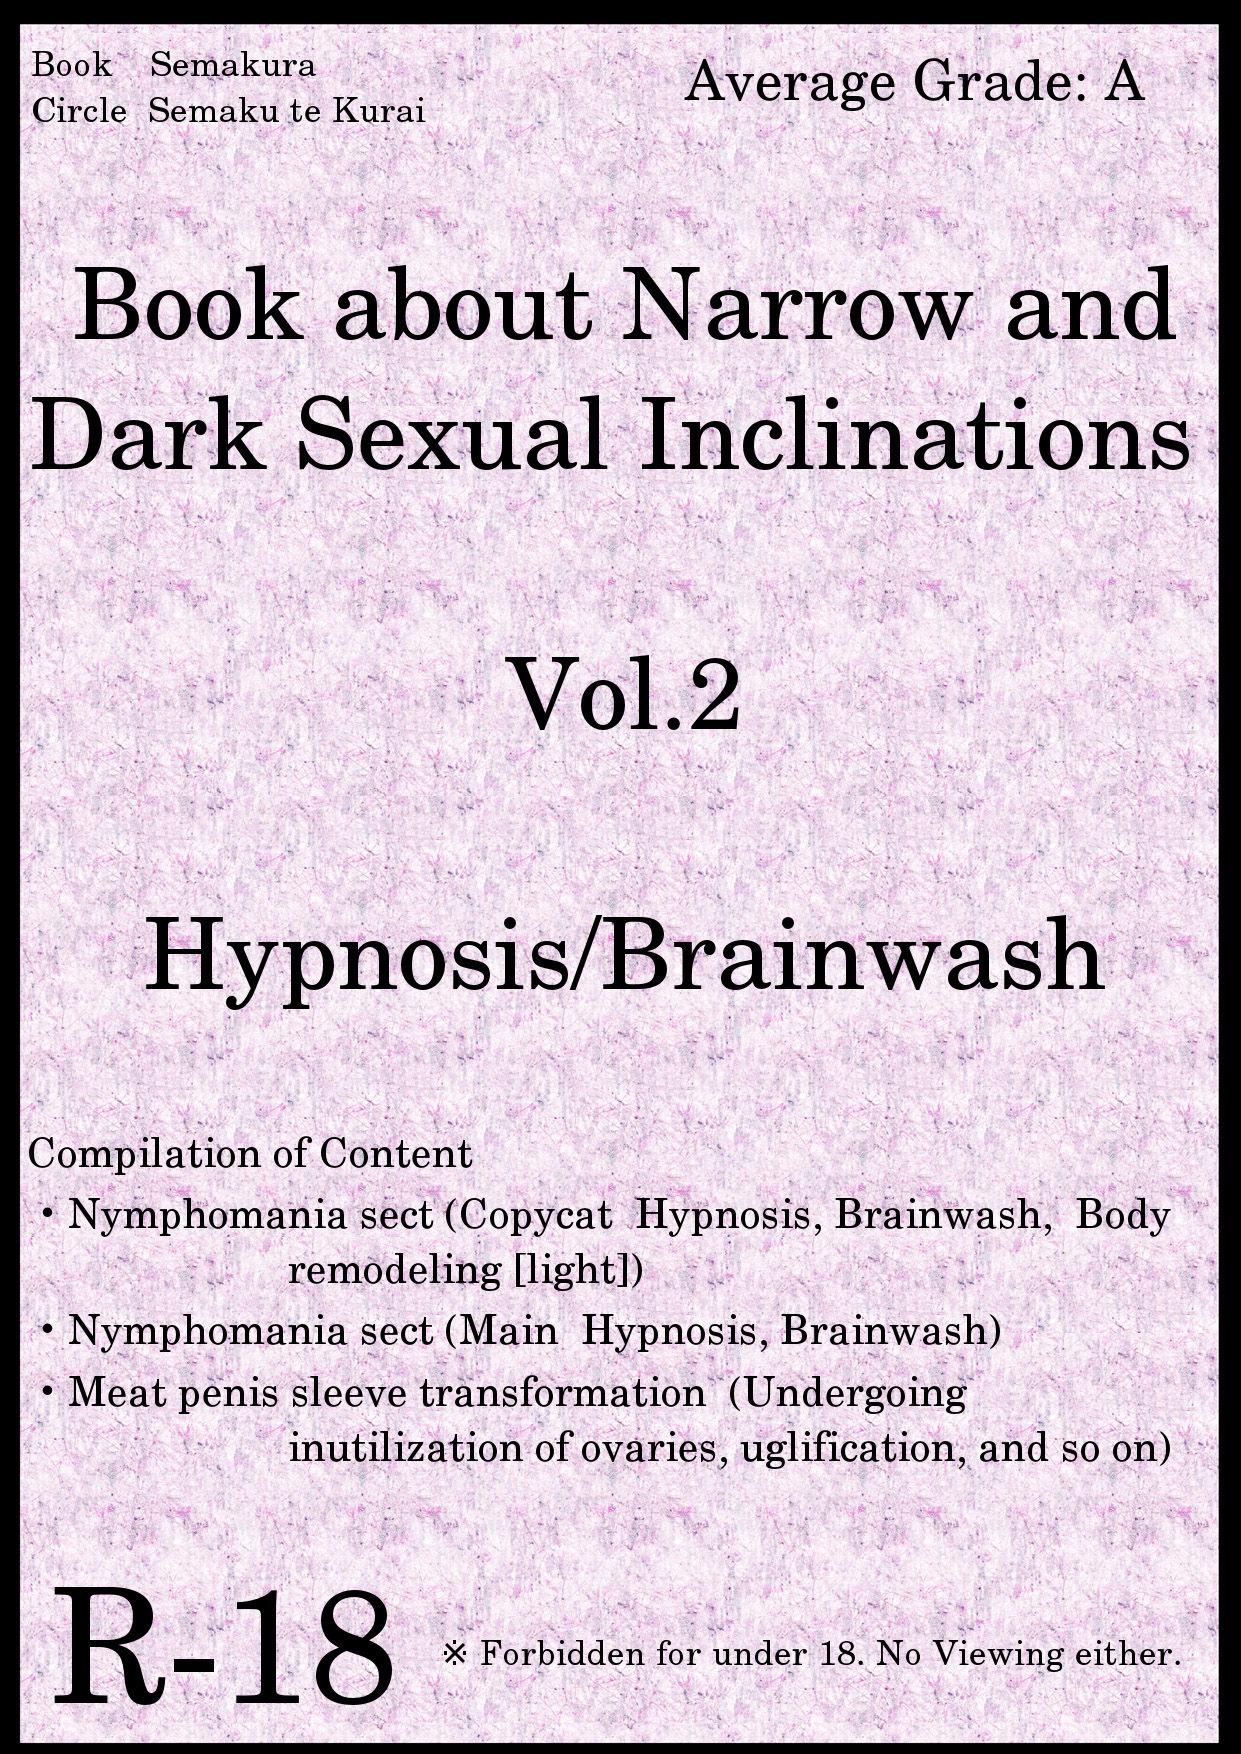 Book about Narrow and Dark Sexual Inclinations Vol.2 Hypnosis/Brainwash 0